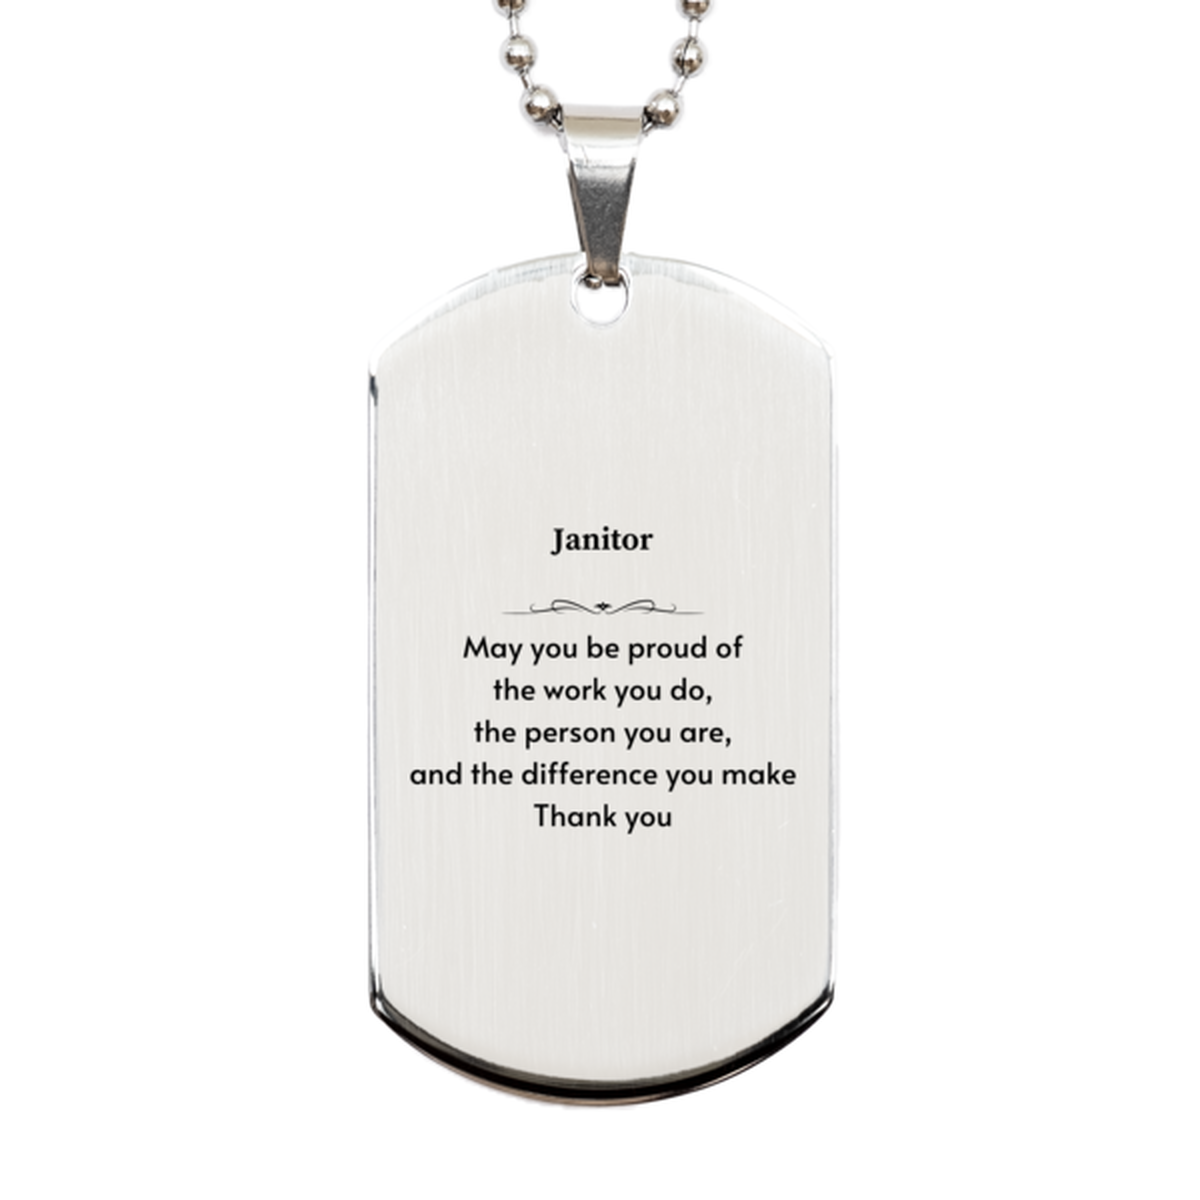 Heartwarming Silver Dog Tag Retirement Coworkers Gifts for Janitor, Janitor May You be proud of the work you do, the person you are Gifts for Boss Men Women Friends